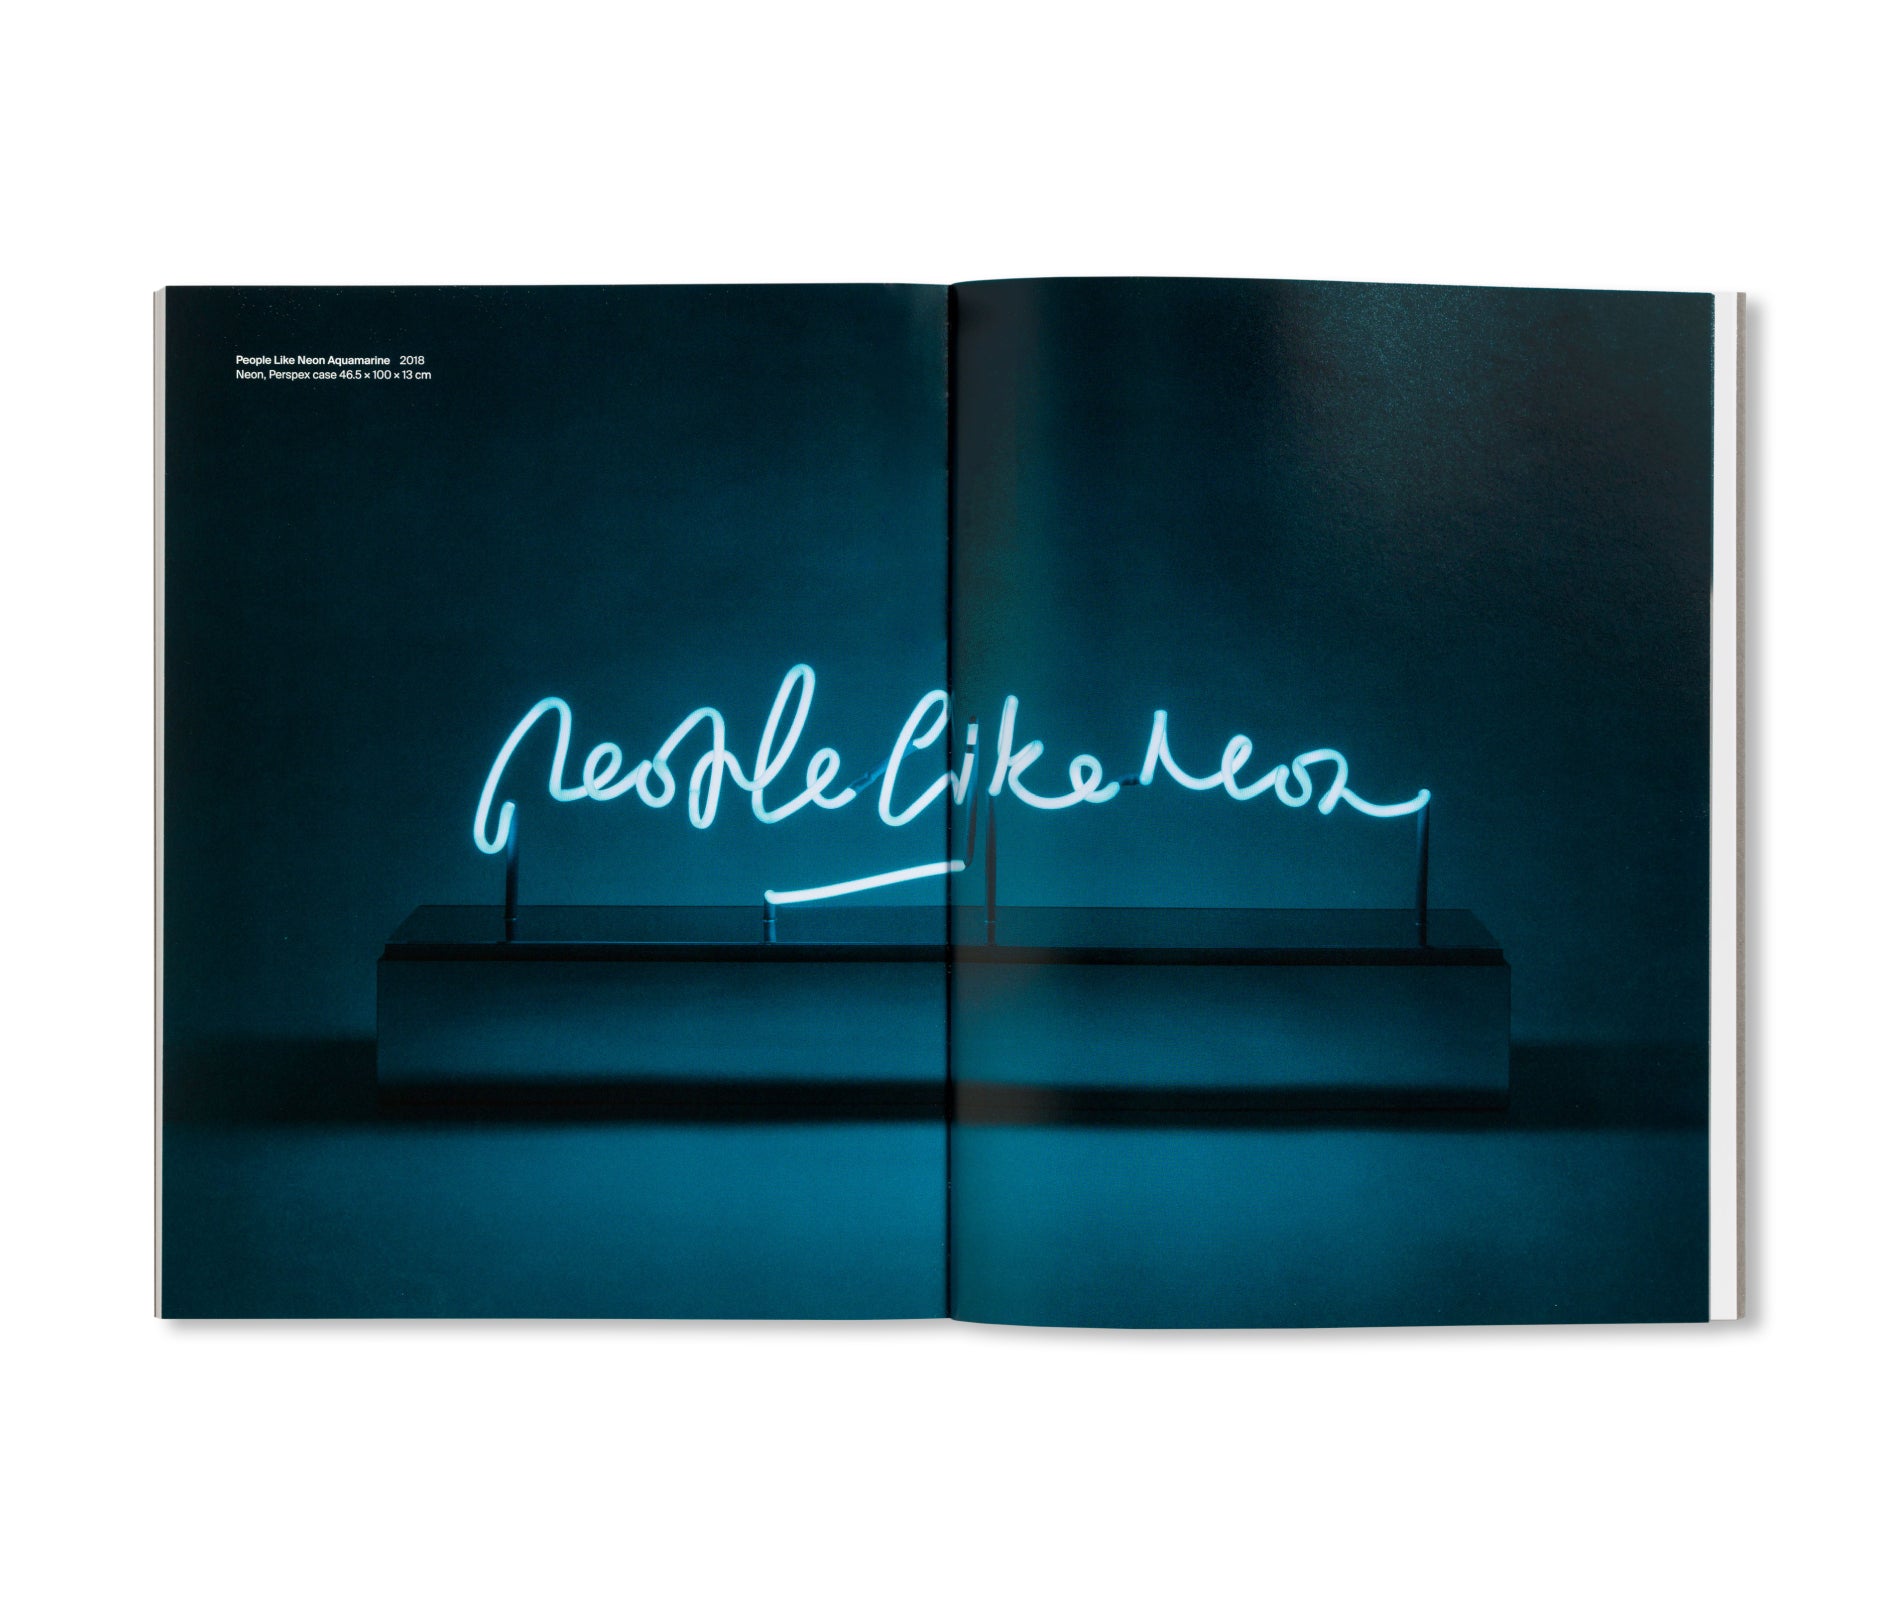 PRINTS AND MULTIPLES/ANNA BLESSMANN AND PETER SAVILLE by Peter Saville [SPECIAL EDITION]